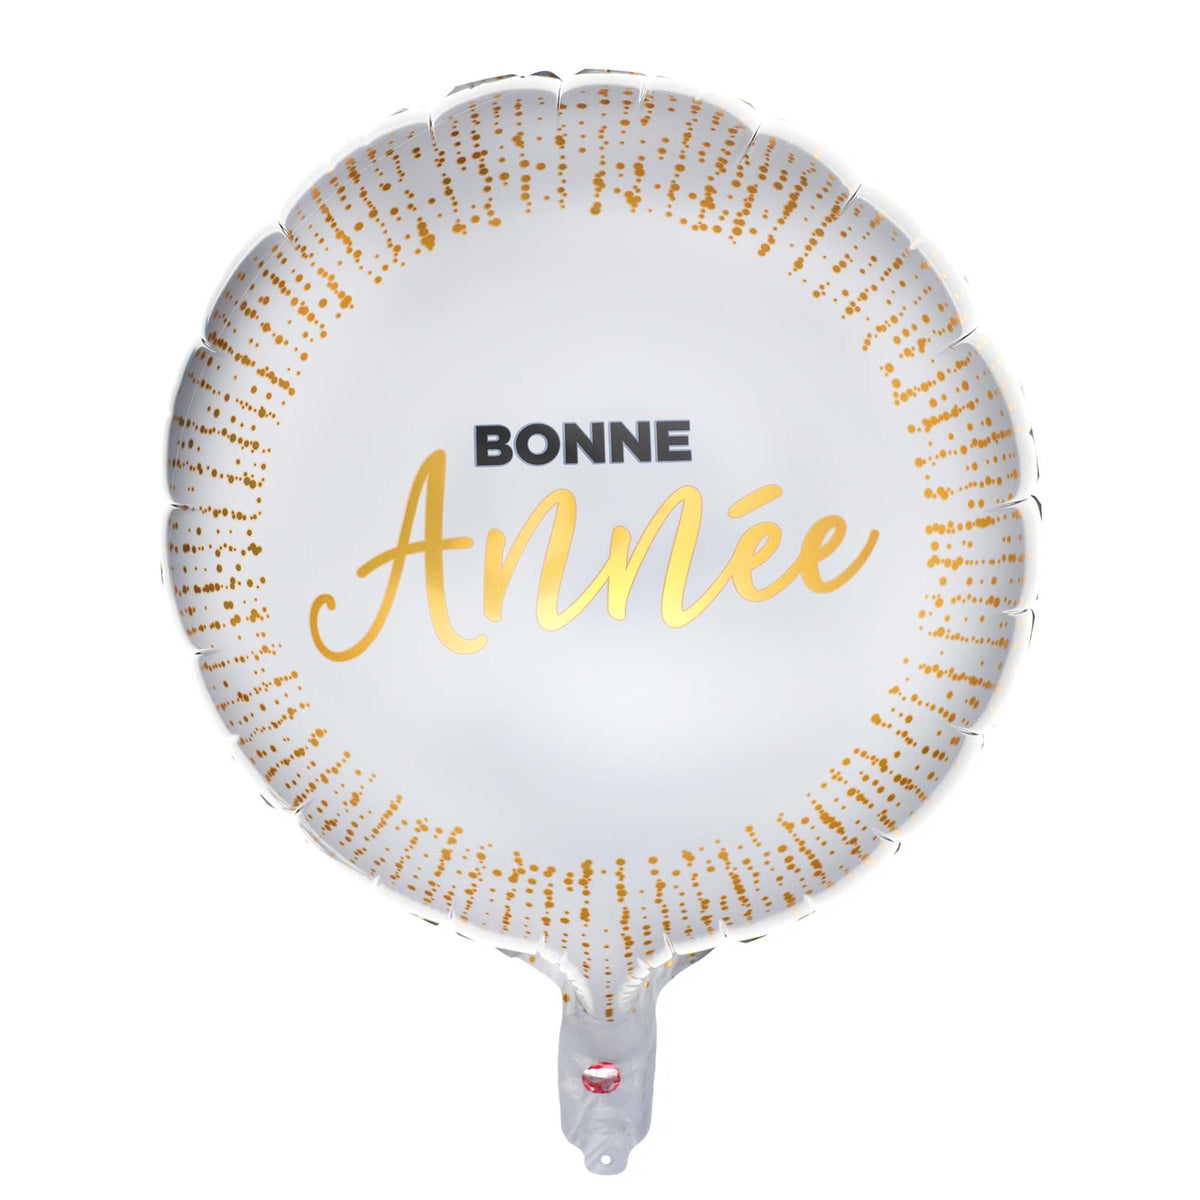 SANTEX Balloons "Bonne Année" Round Foil Balloon, White and Gold, 18 Inches, 1 Count